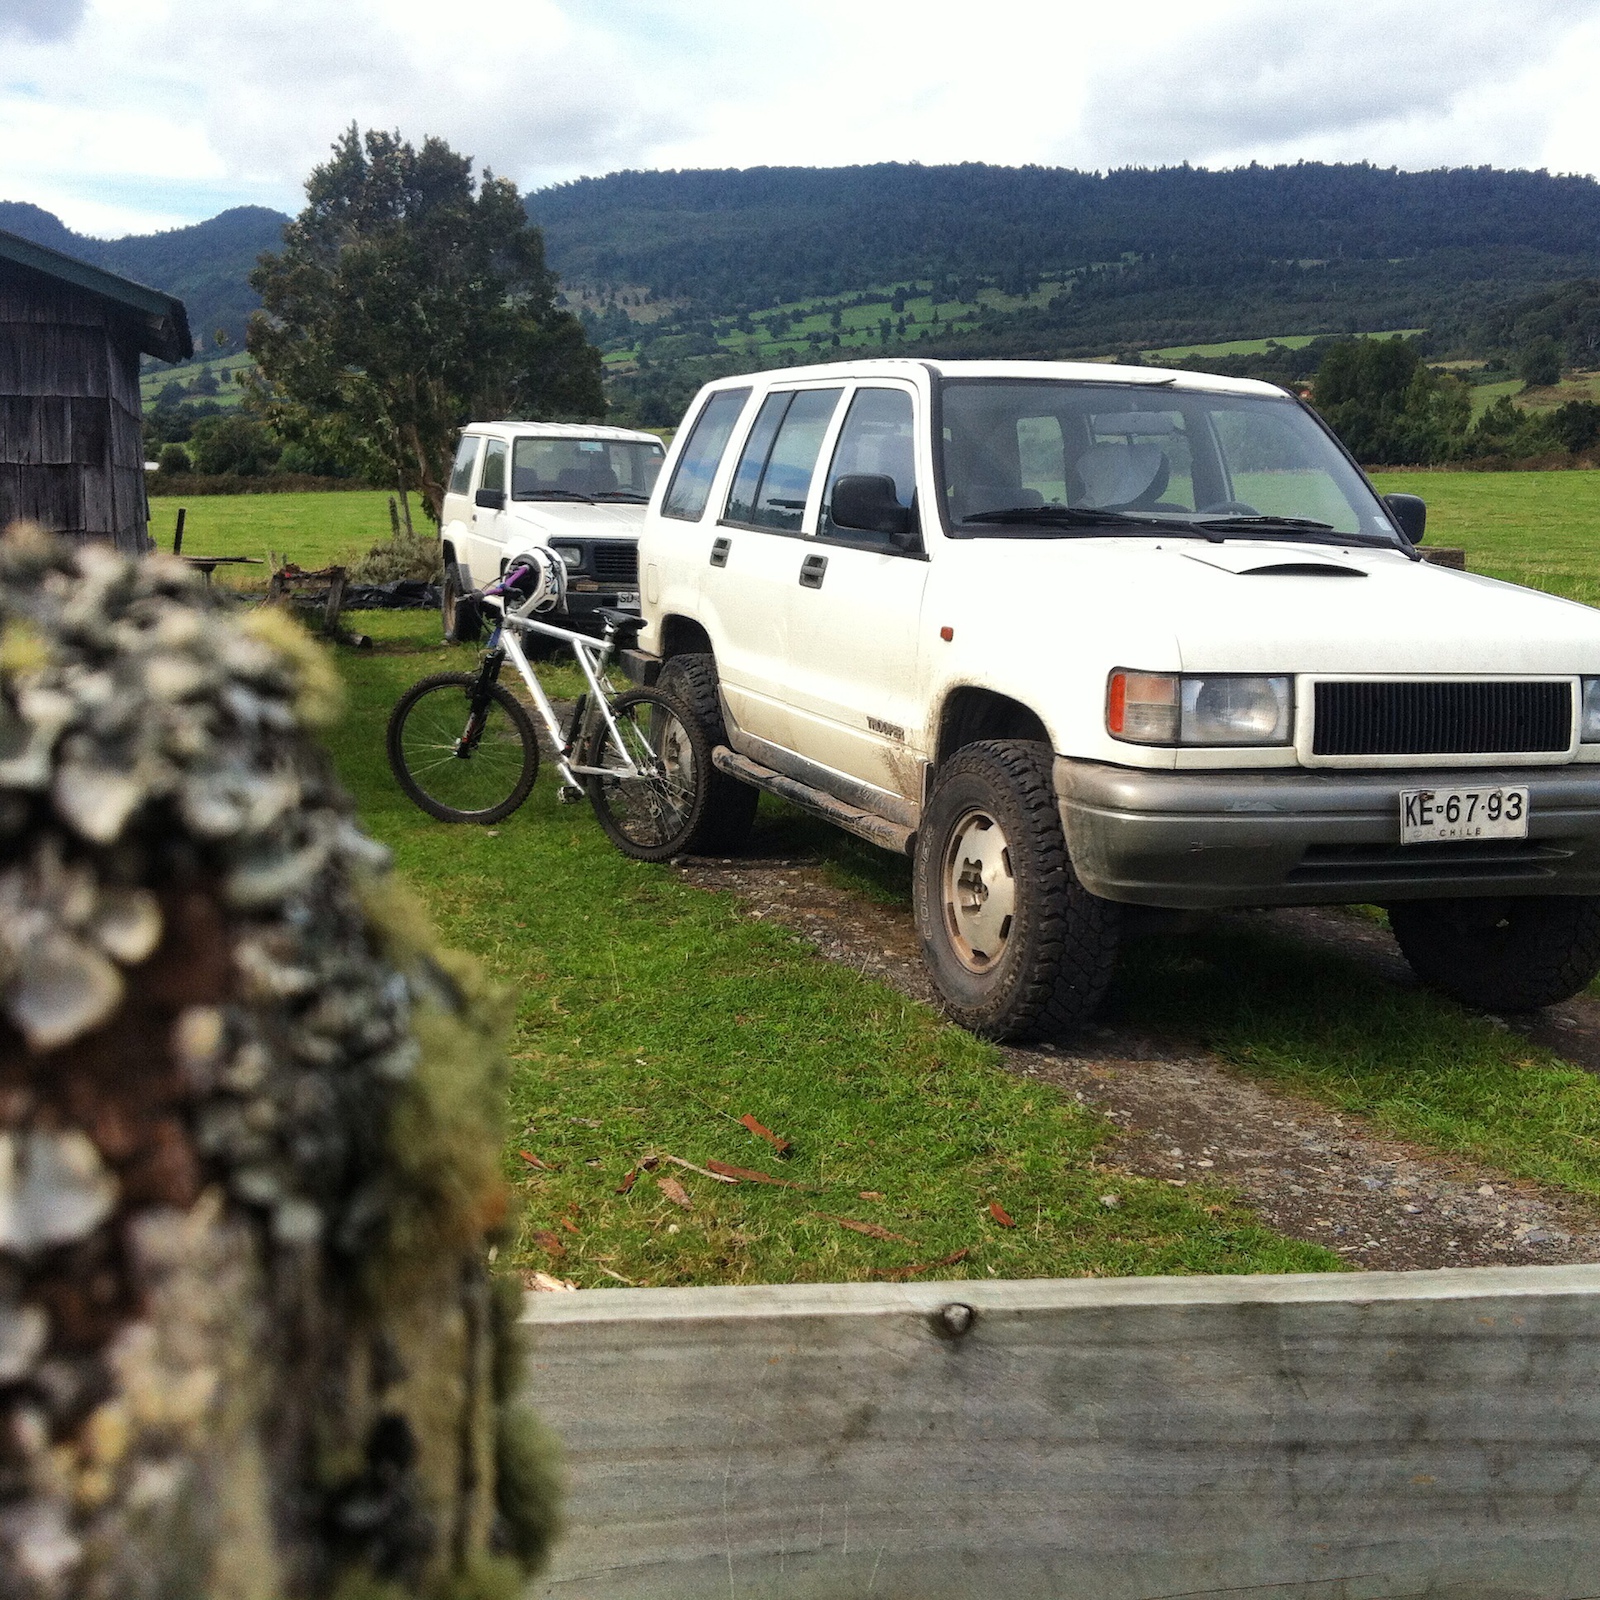 These are my daily and off-roading/bike transport rigs.